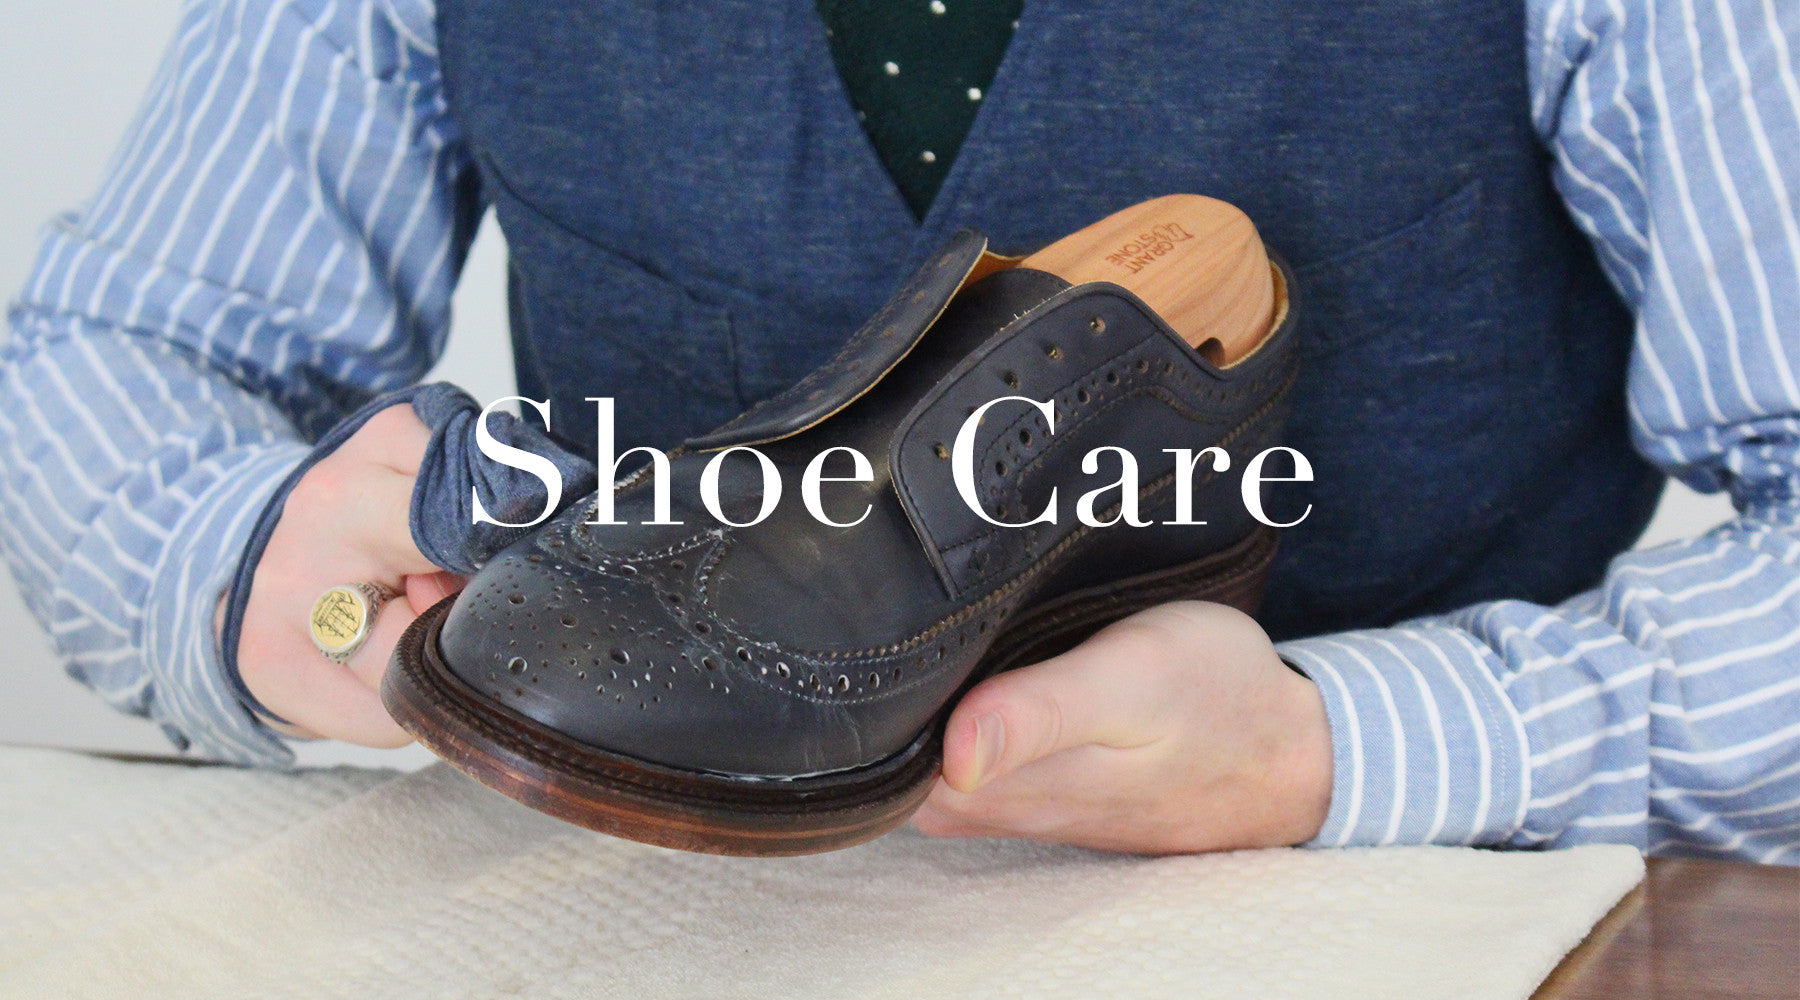 How to polish your shoes the right way